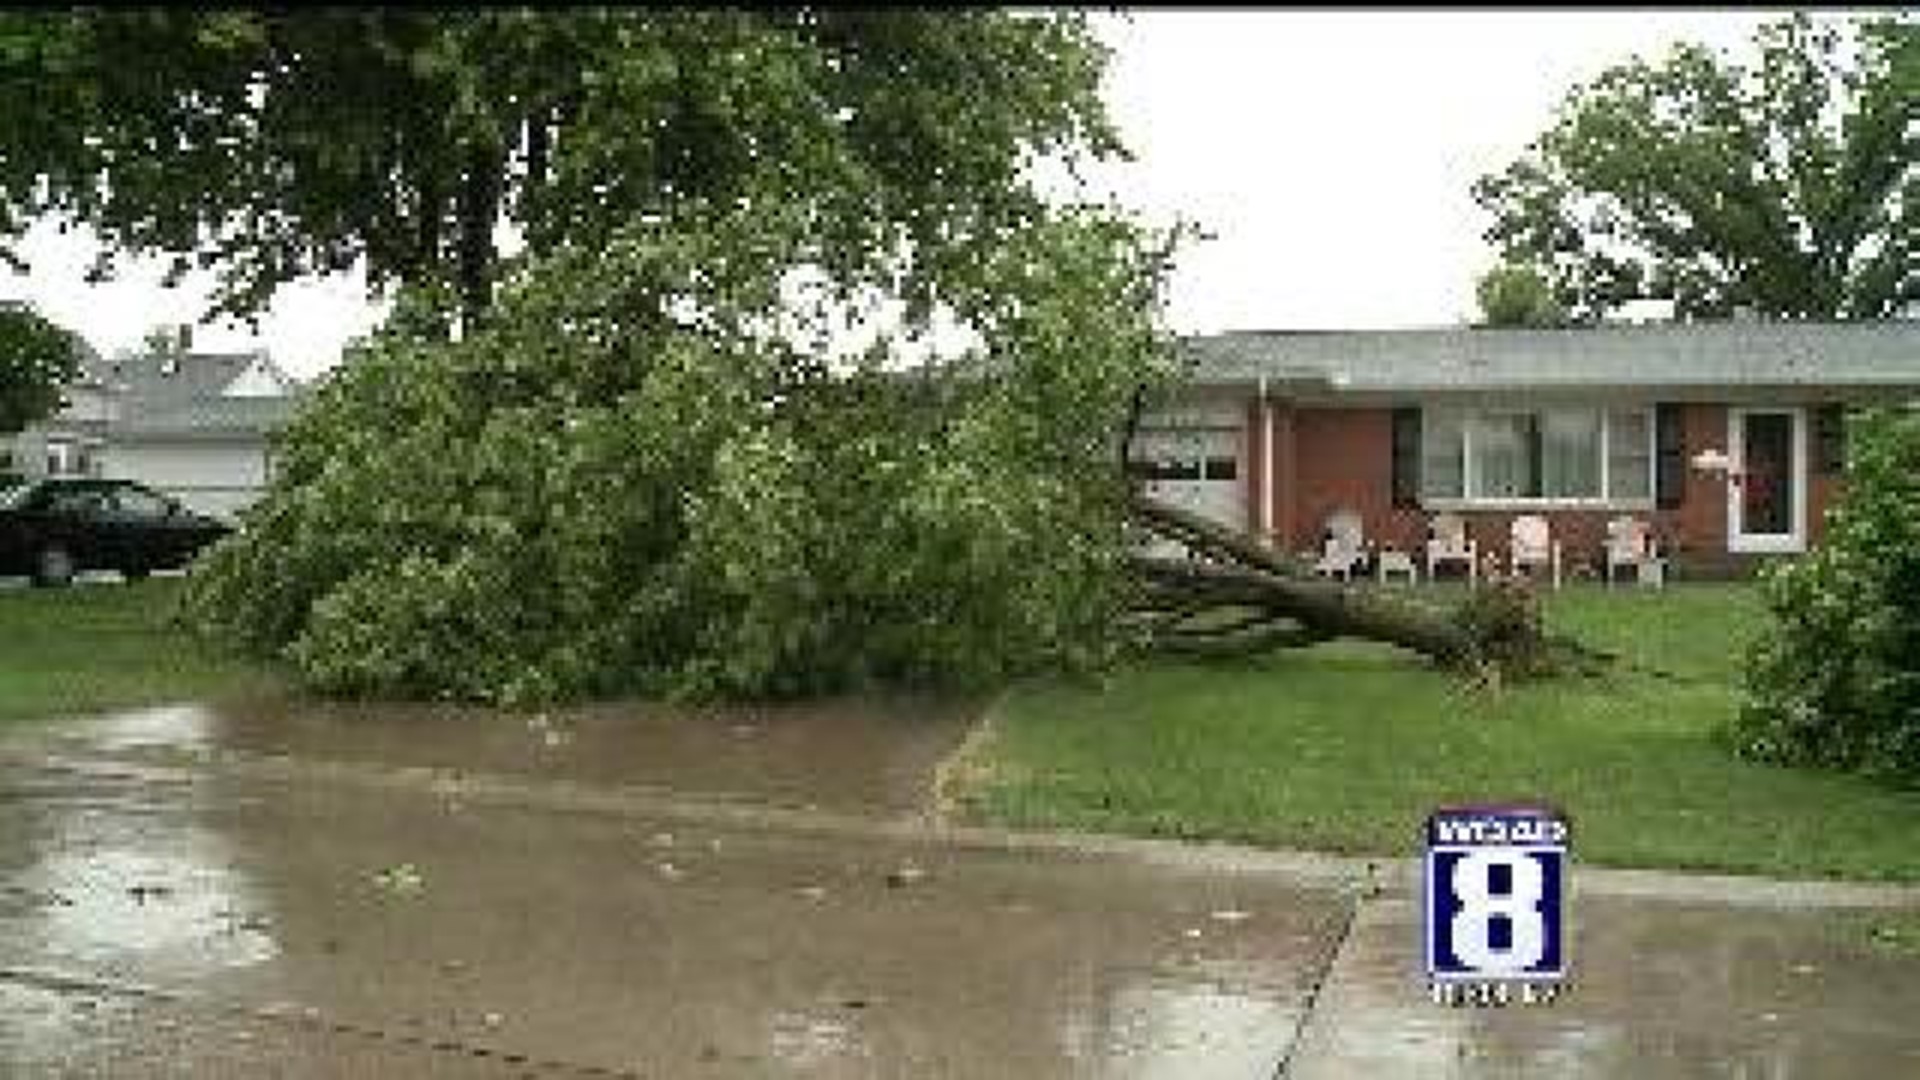 More than 100 trees damaged in Moline